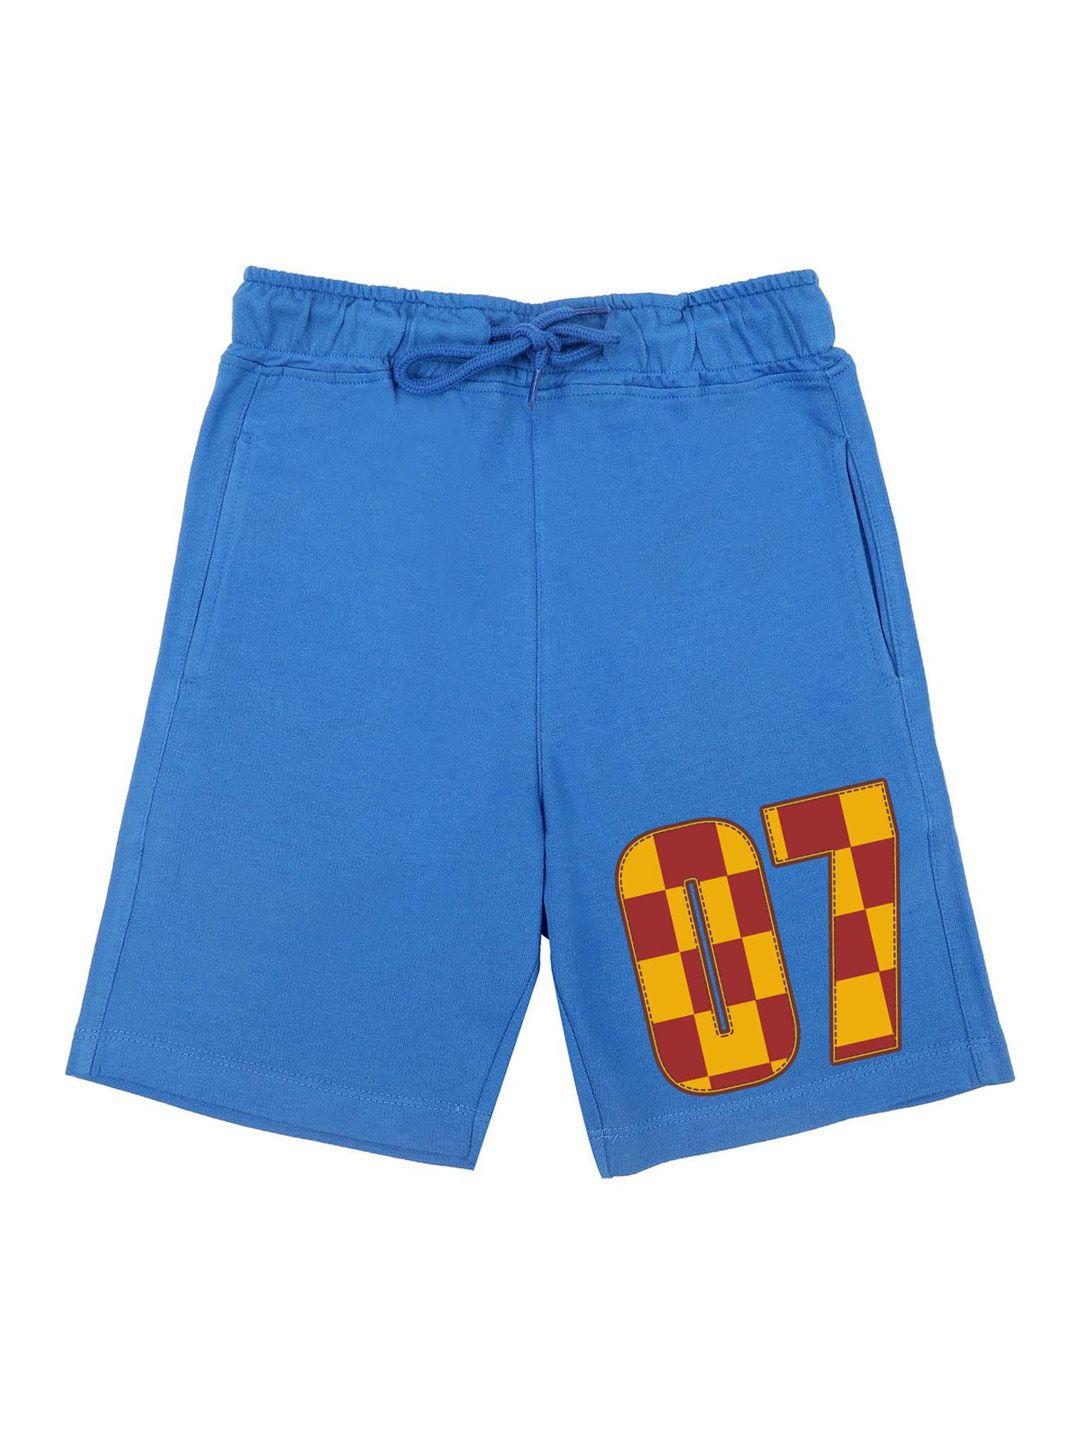 harry potter by wear your mind boys blue & yellow harry potter printed shorts